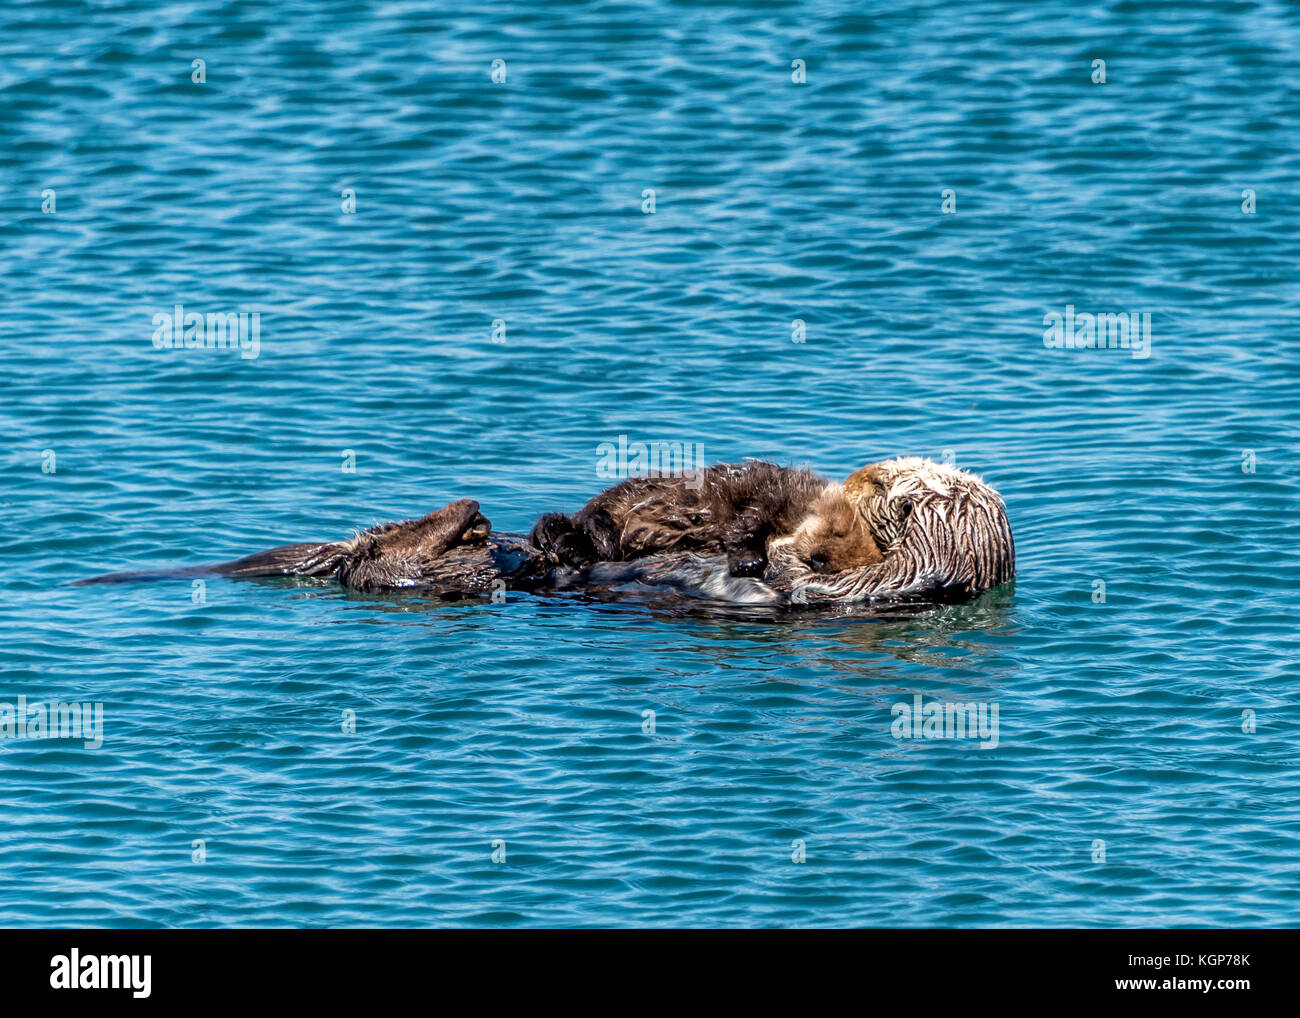 Mother and baby sea otter at Morro Bay, California; cute baby otter sleeping on mother floating in water. Stock Photo